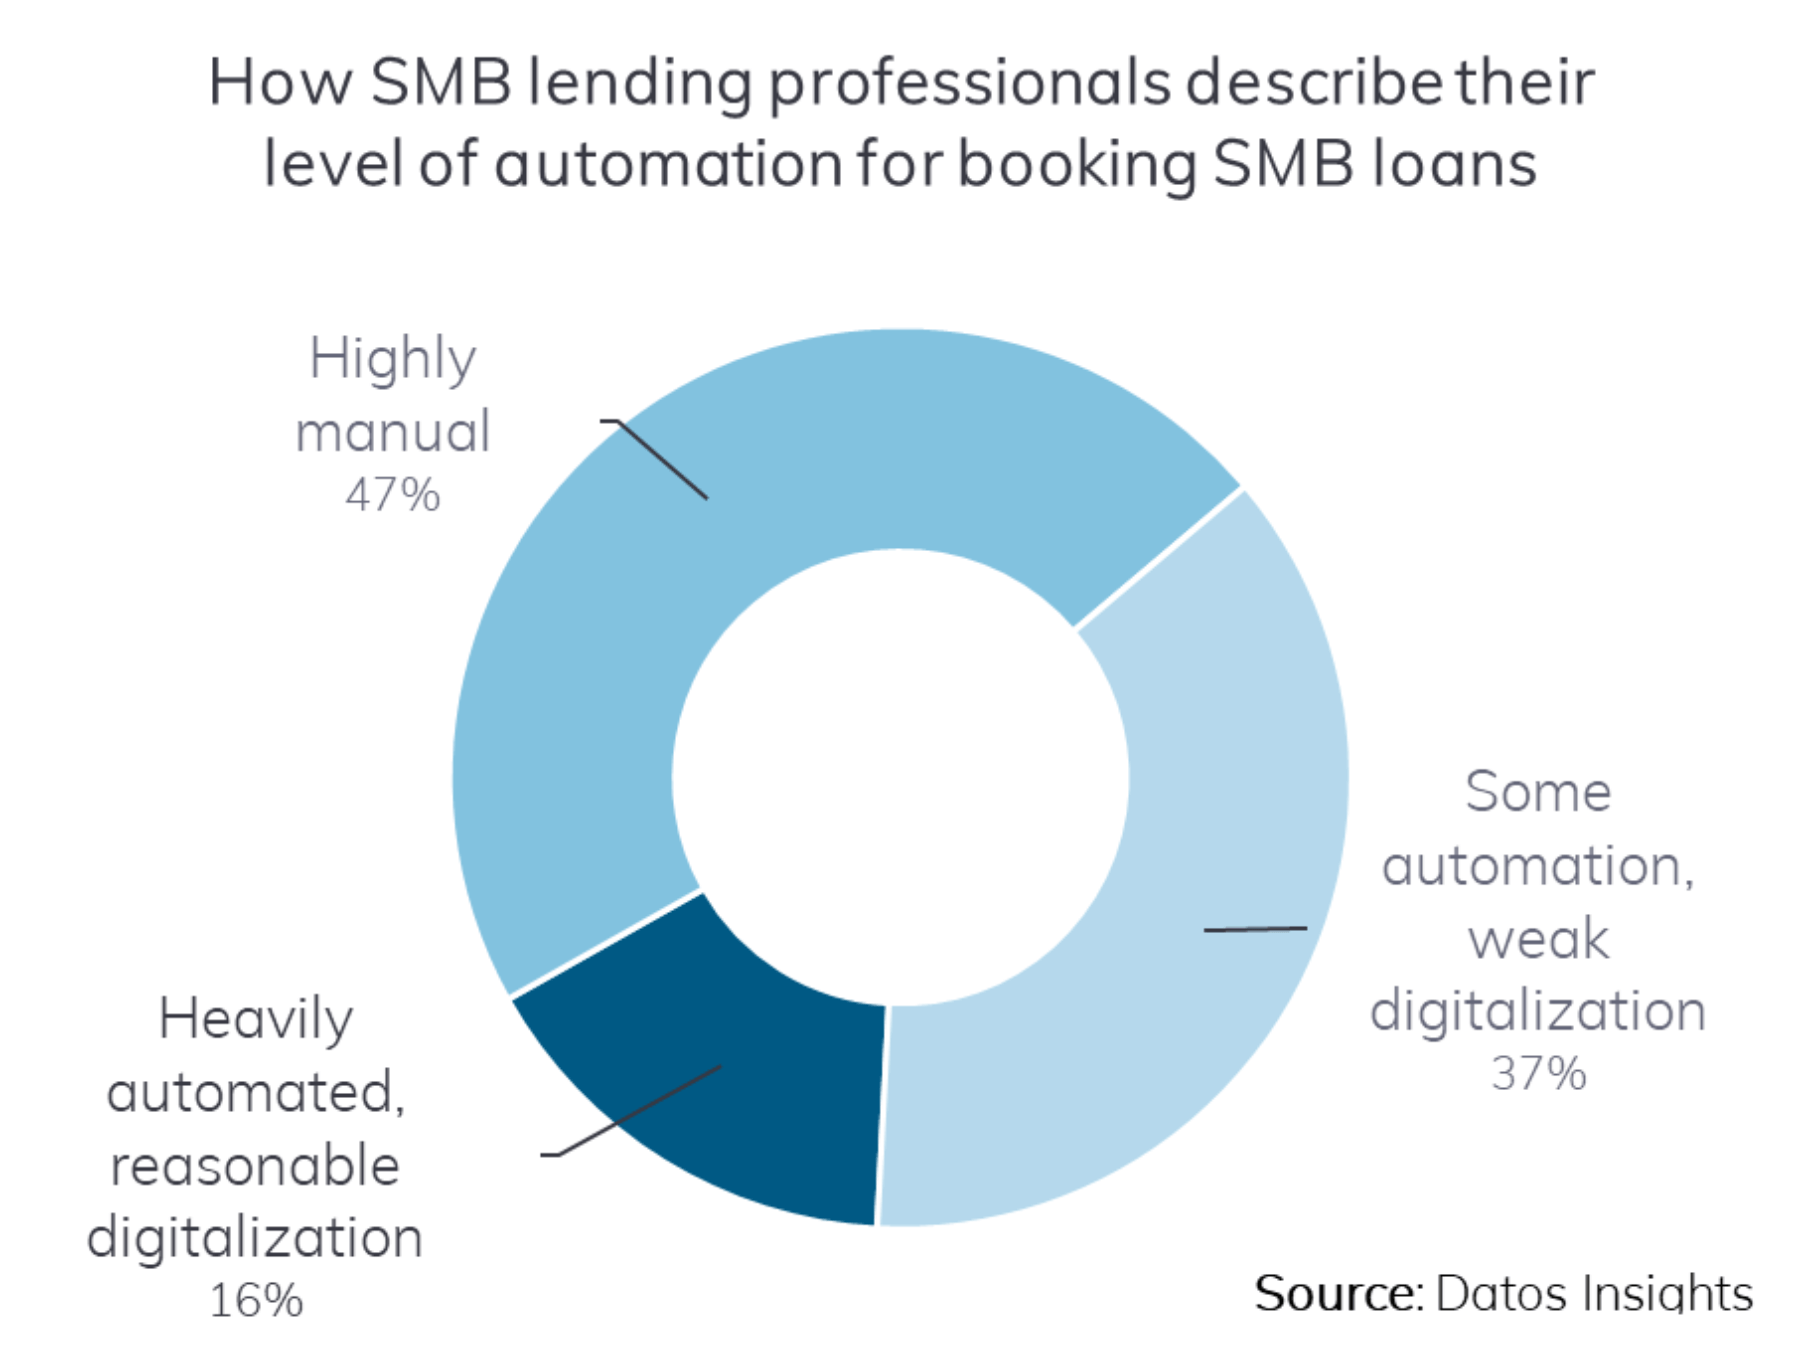 Pie chart showing lenders' level of automation for SMB loans